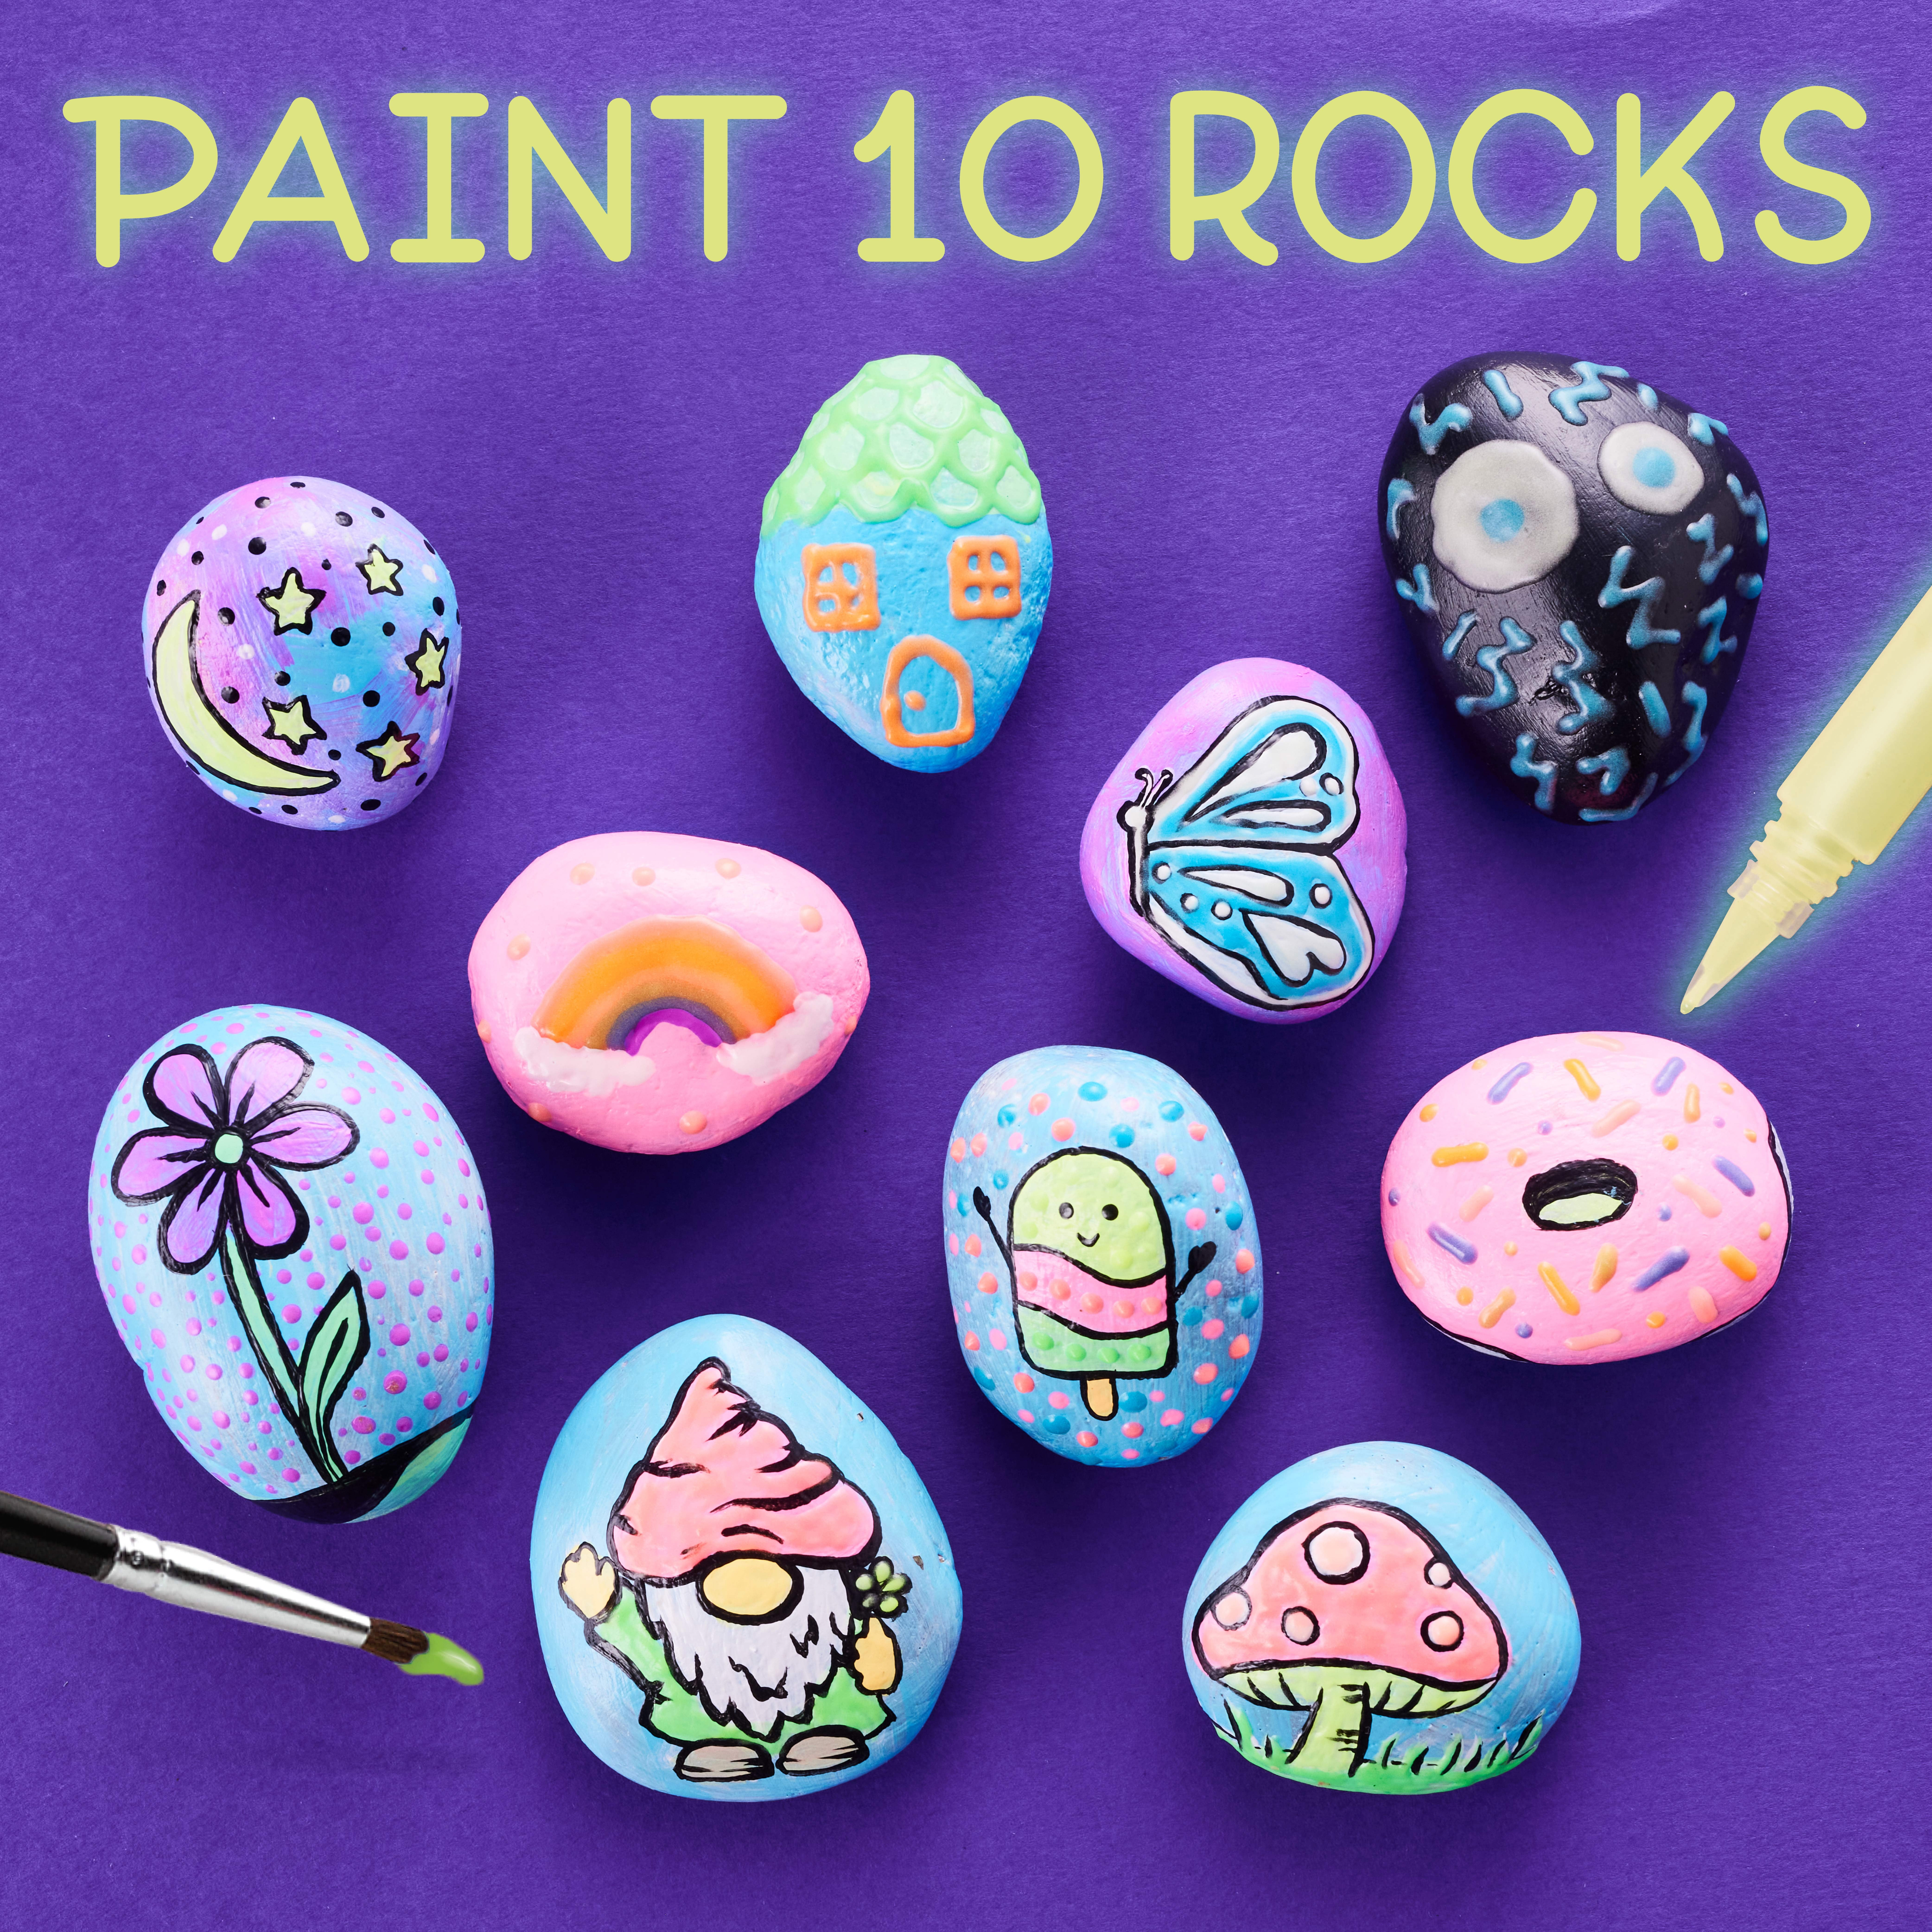 Dezzys Workshop Rock Painting Kit for Kids - Arts & crafts Supplies Set for  girls & Boys Ages 6-12 - Educational Art Supplies fo